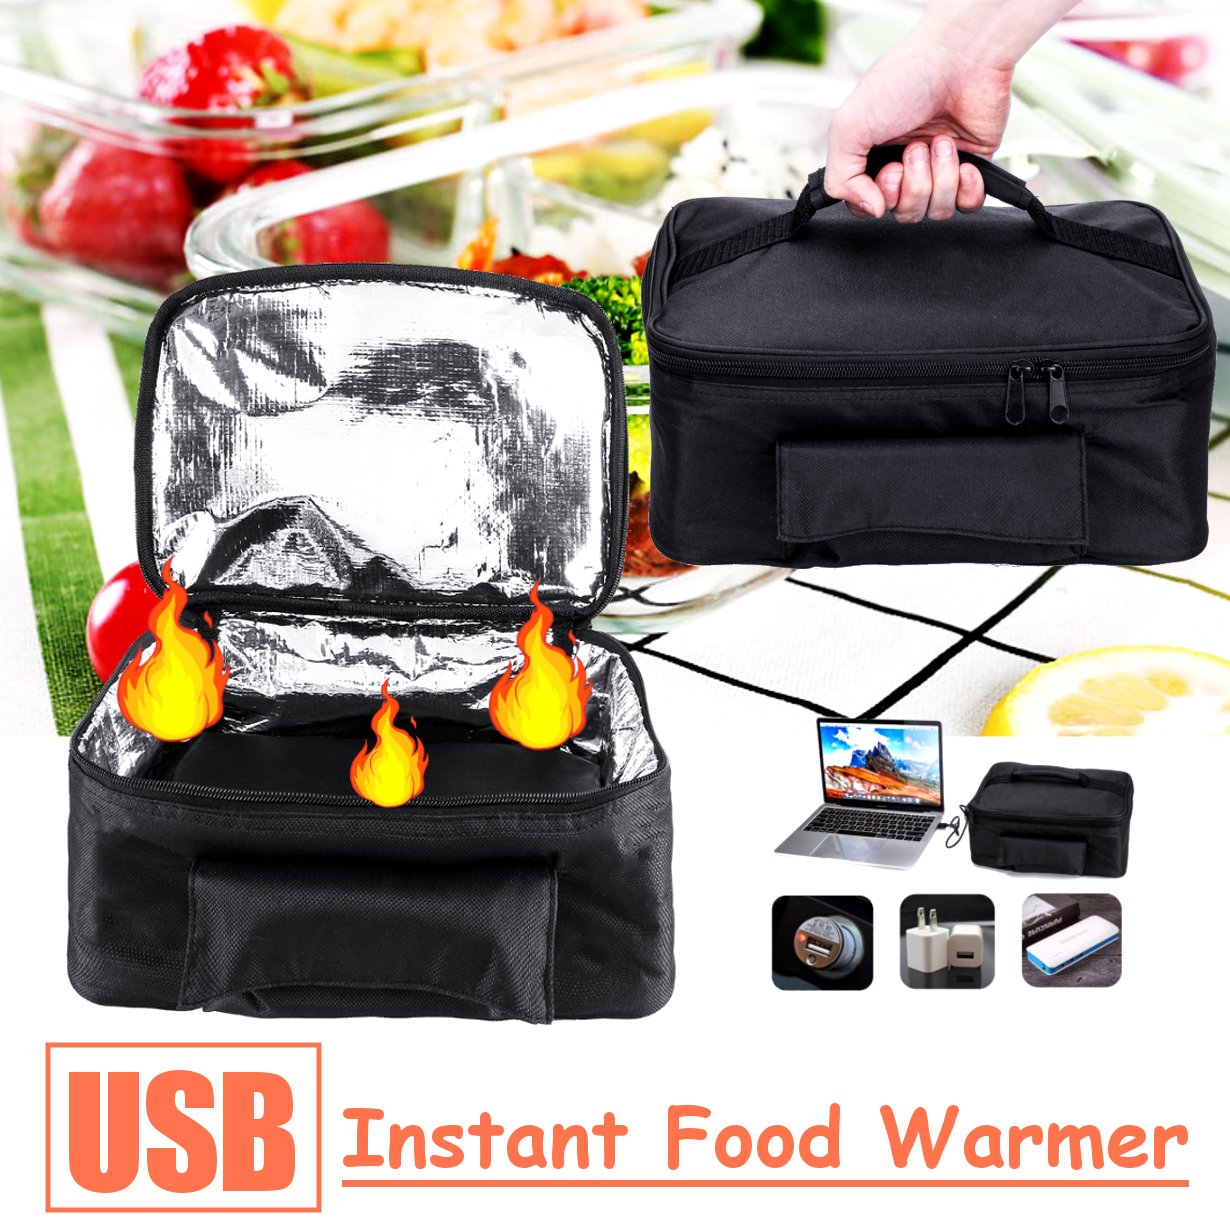 Car Lunch Insulation Boxes Portable Lunch Oven Bag Instant Food Heater Warmer 